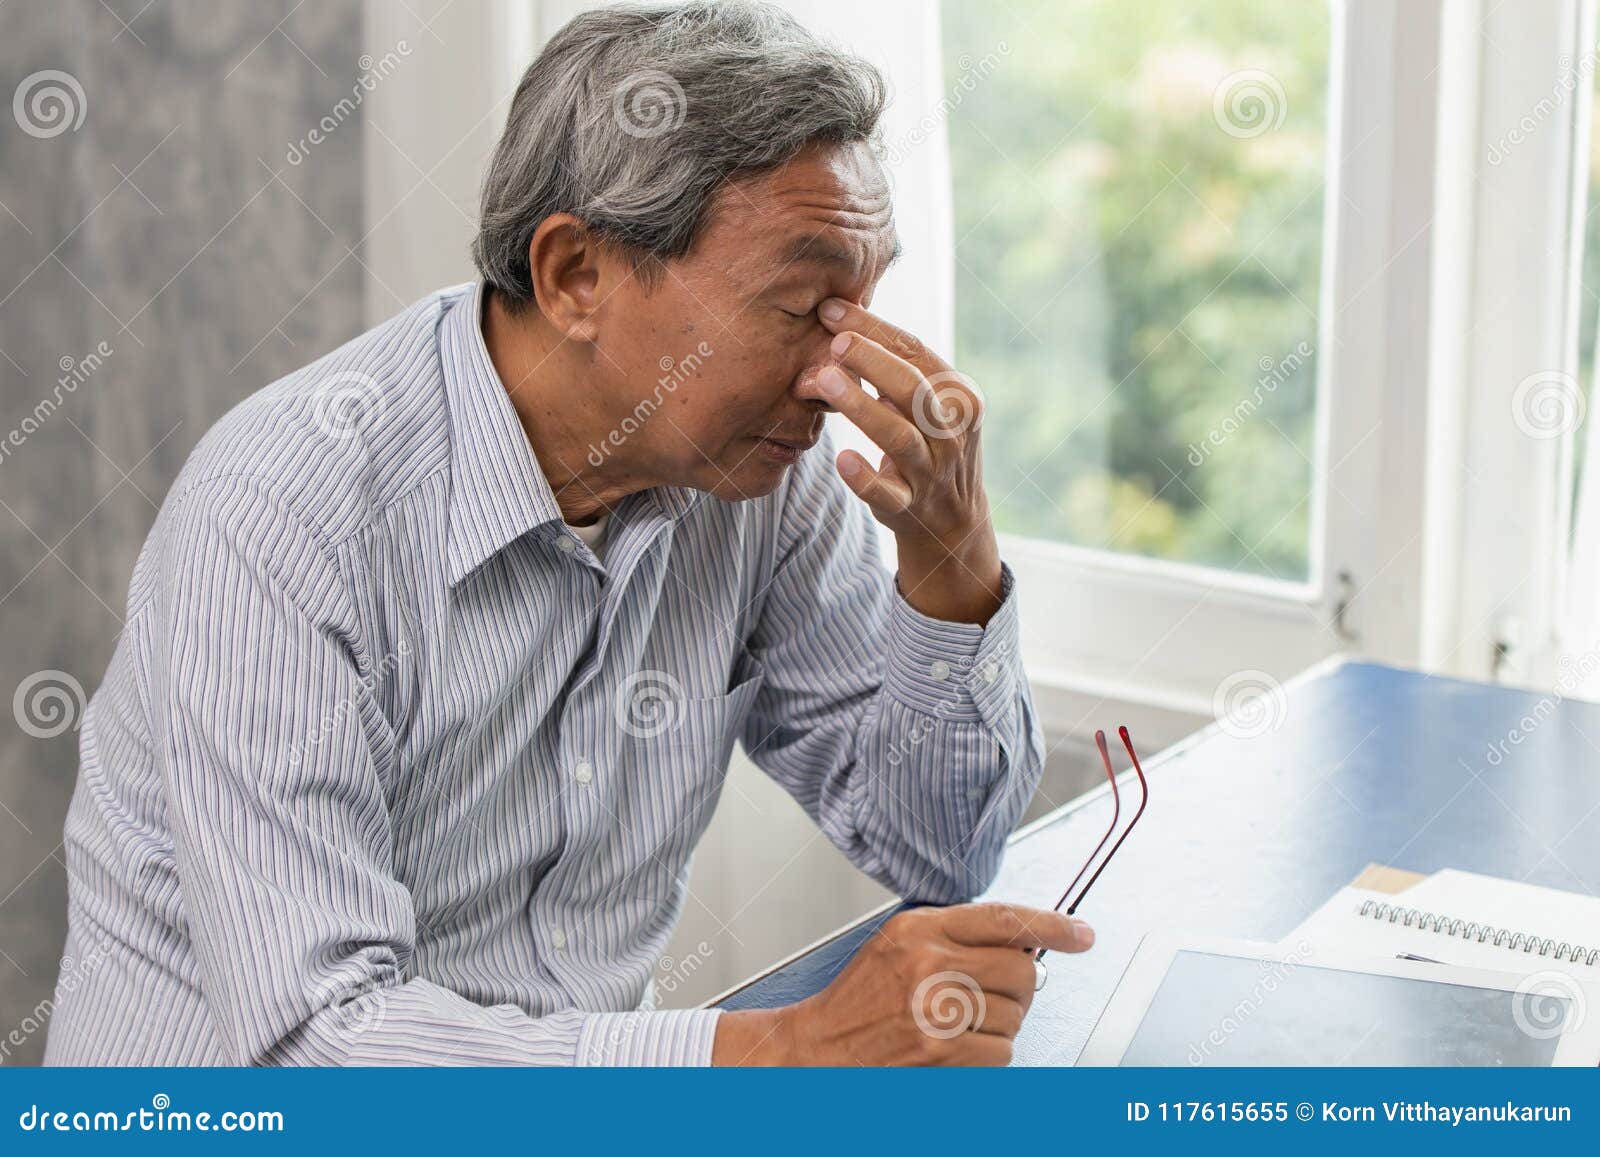 elderly stress tired and holding his nose suffer sinus pain fatigue